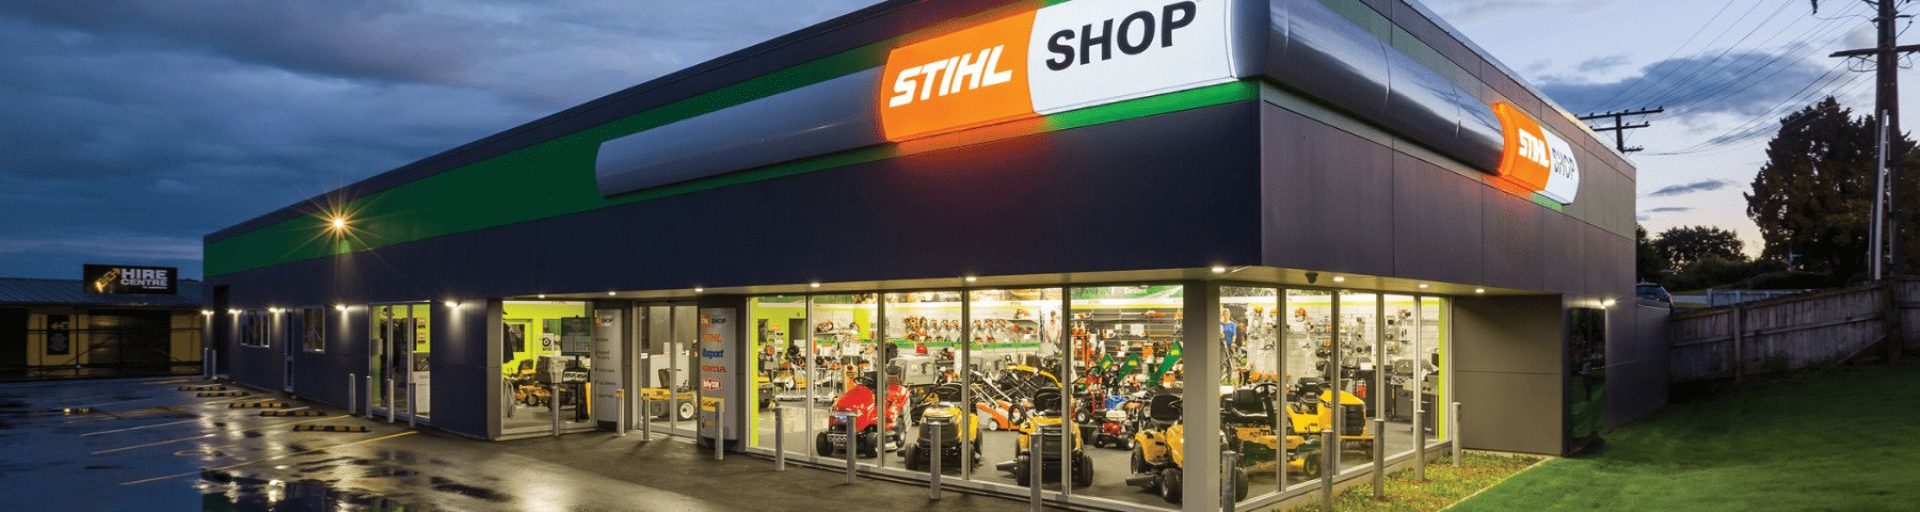 Stihl Shop showcasing Industrial Steel Building Construction from Coresteel